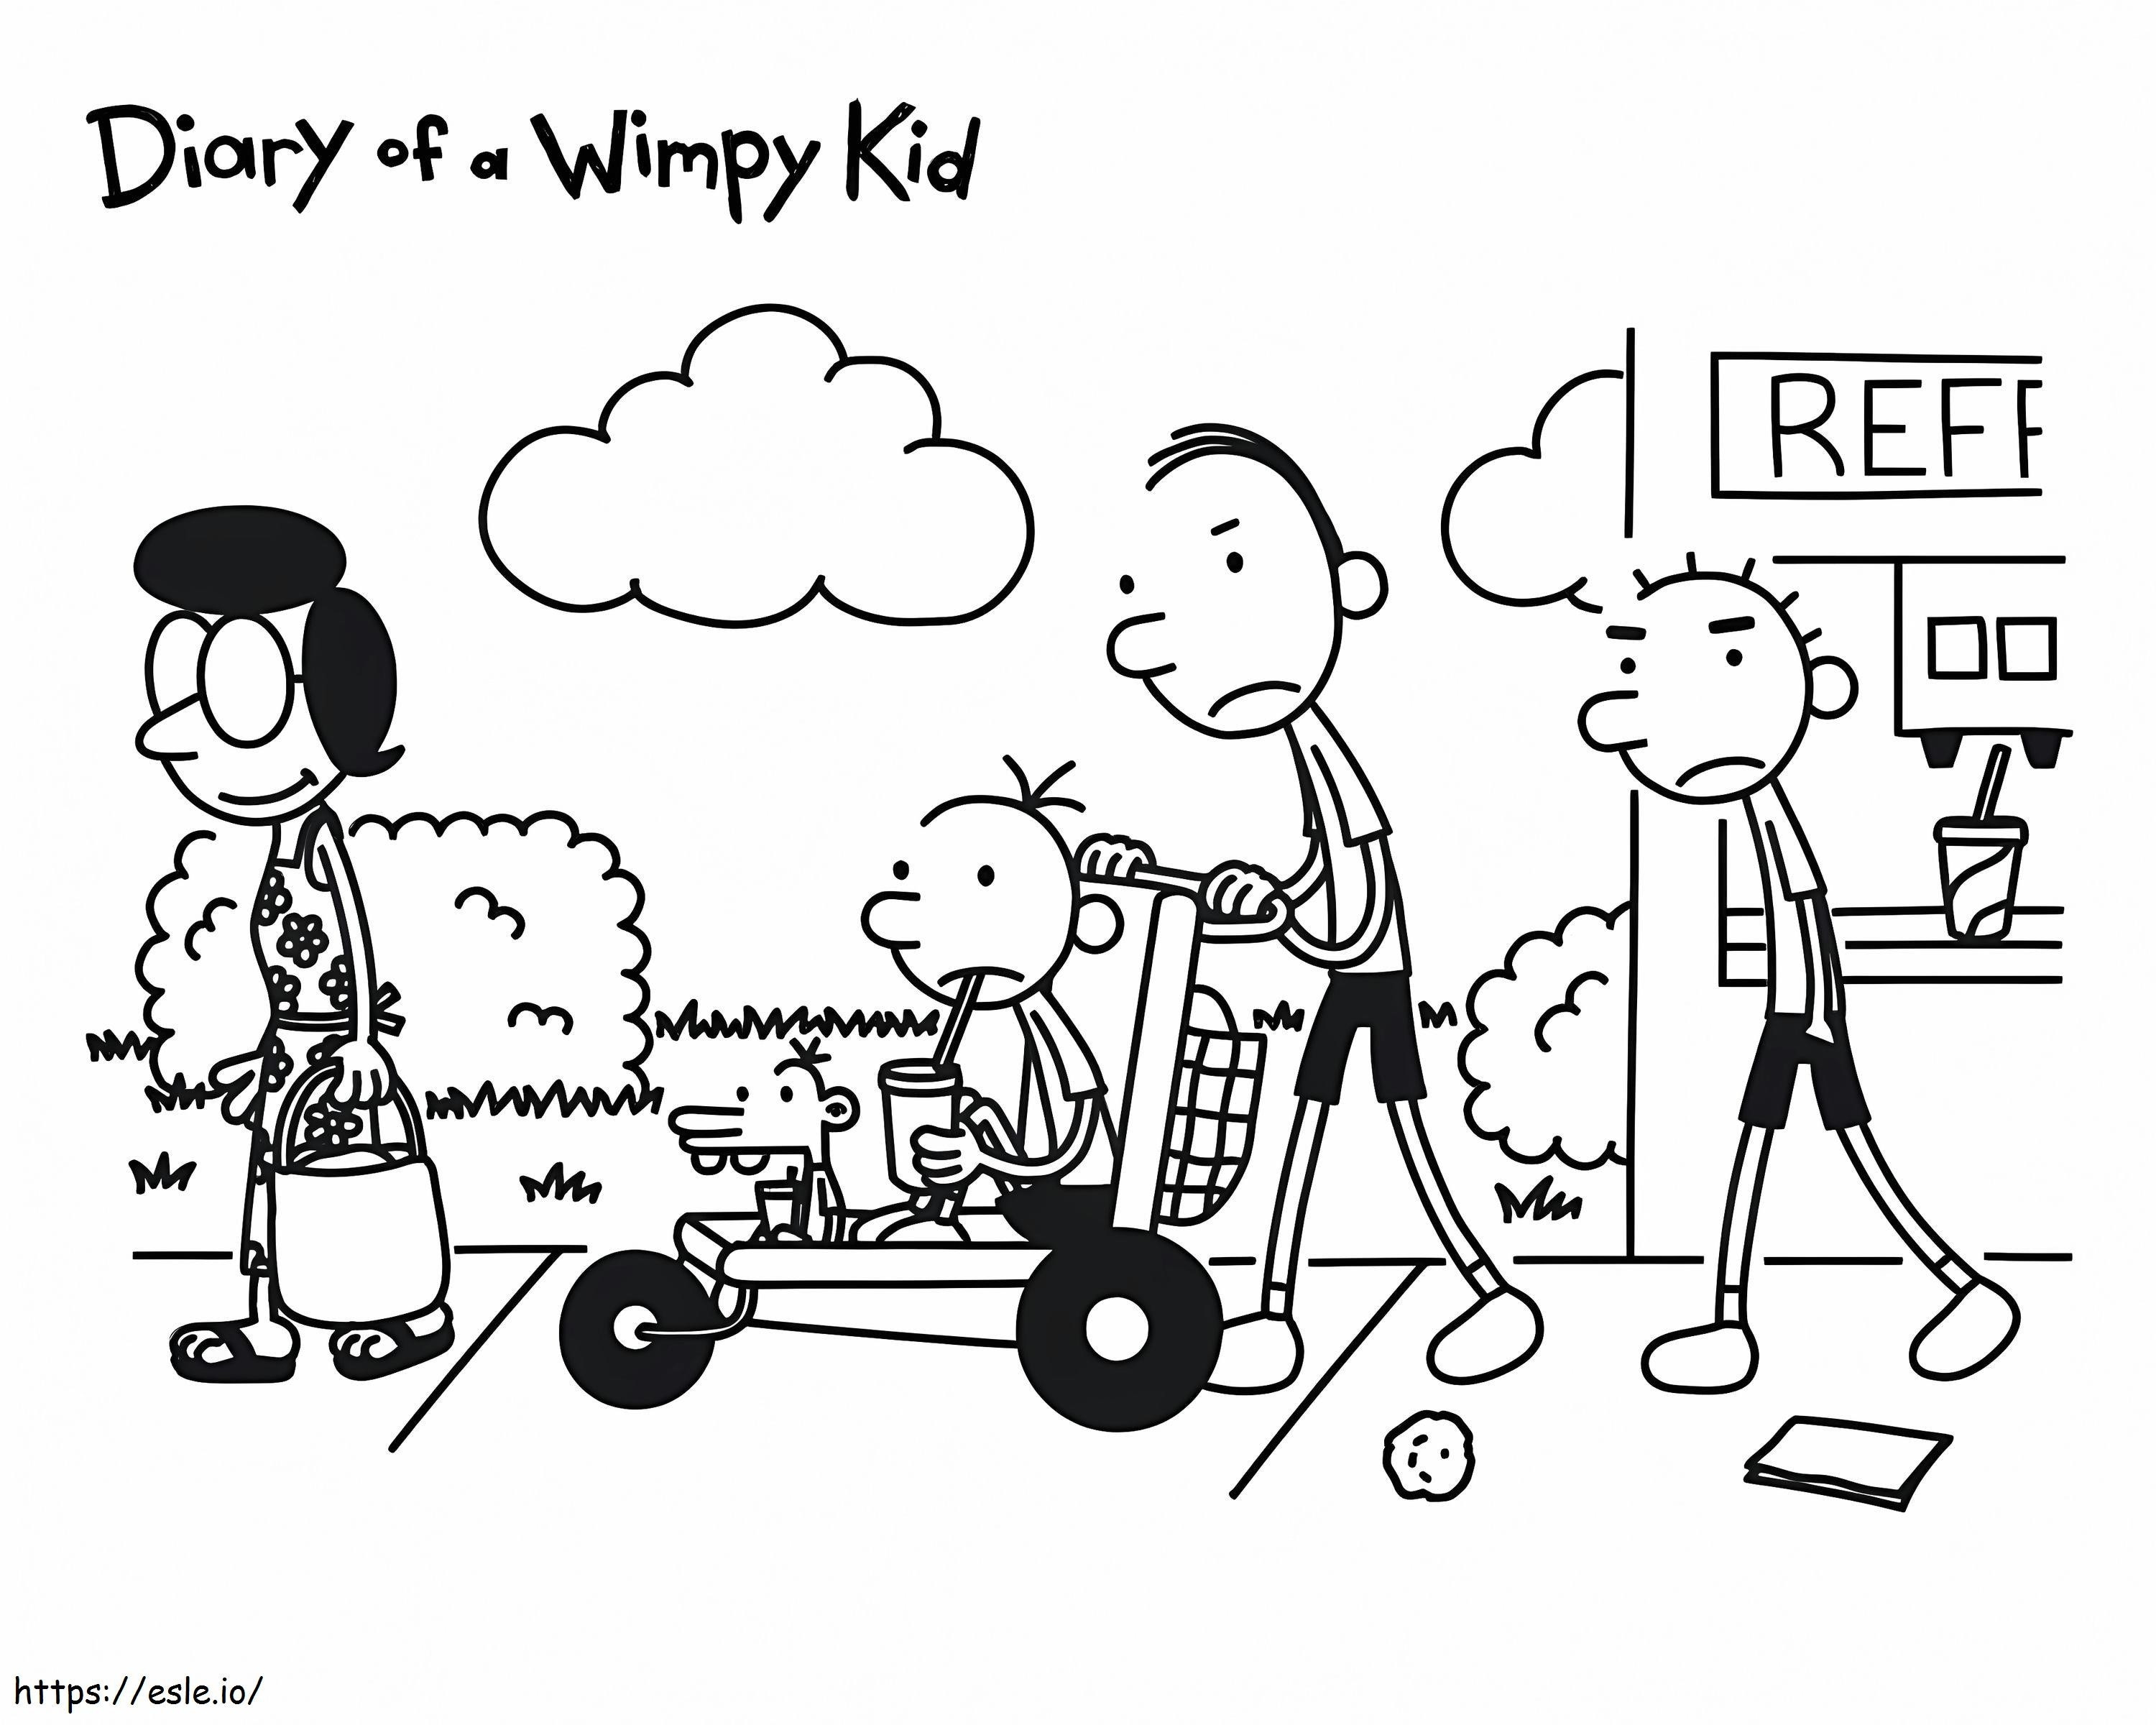 Diary Of A Wimpy Kid coloring page